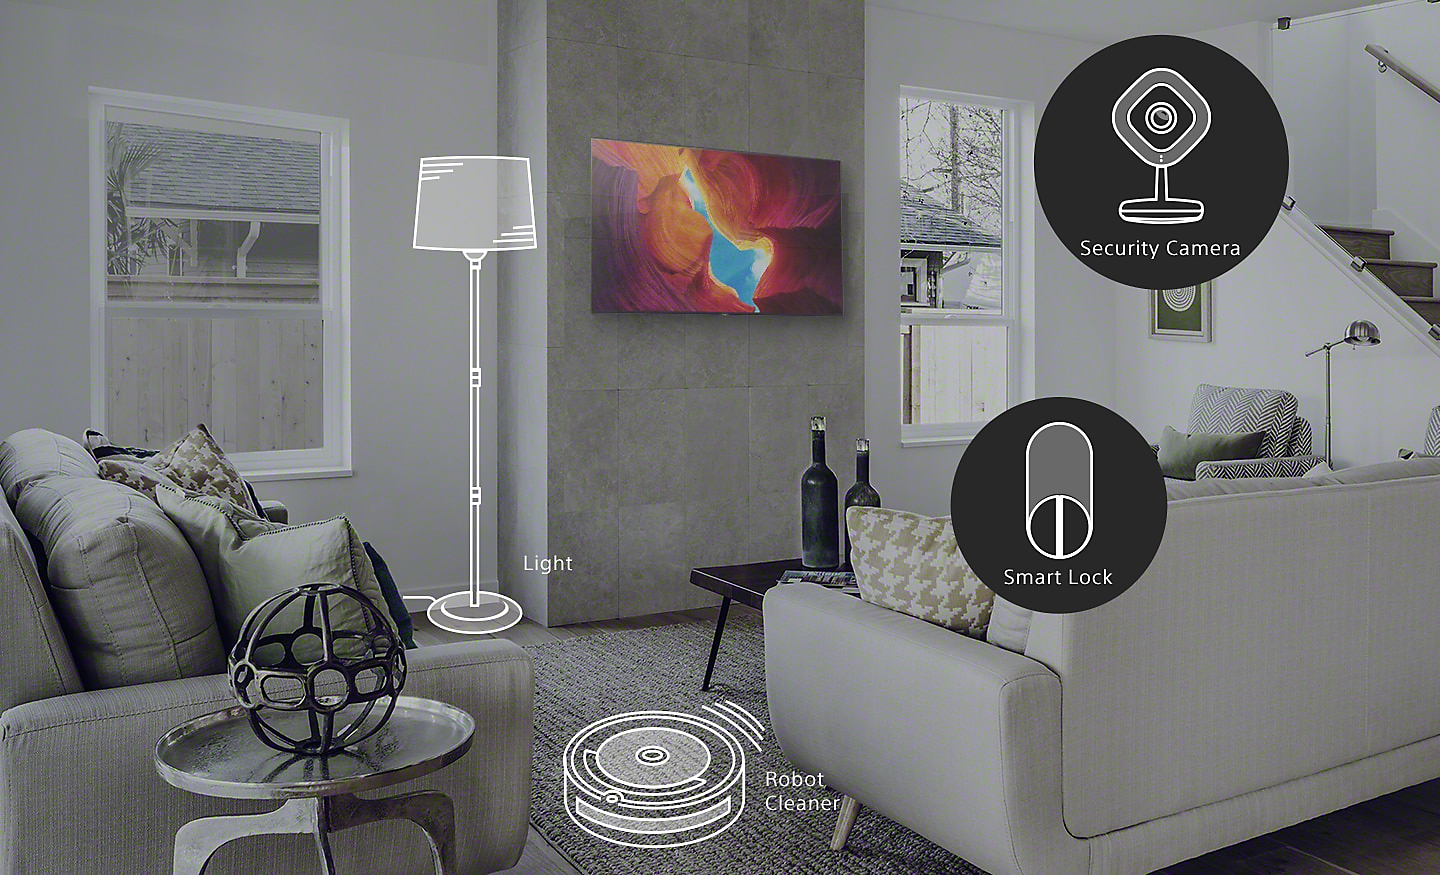 Living room scene showing smart home devices including light, robot cleaner, security camera and smart lock